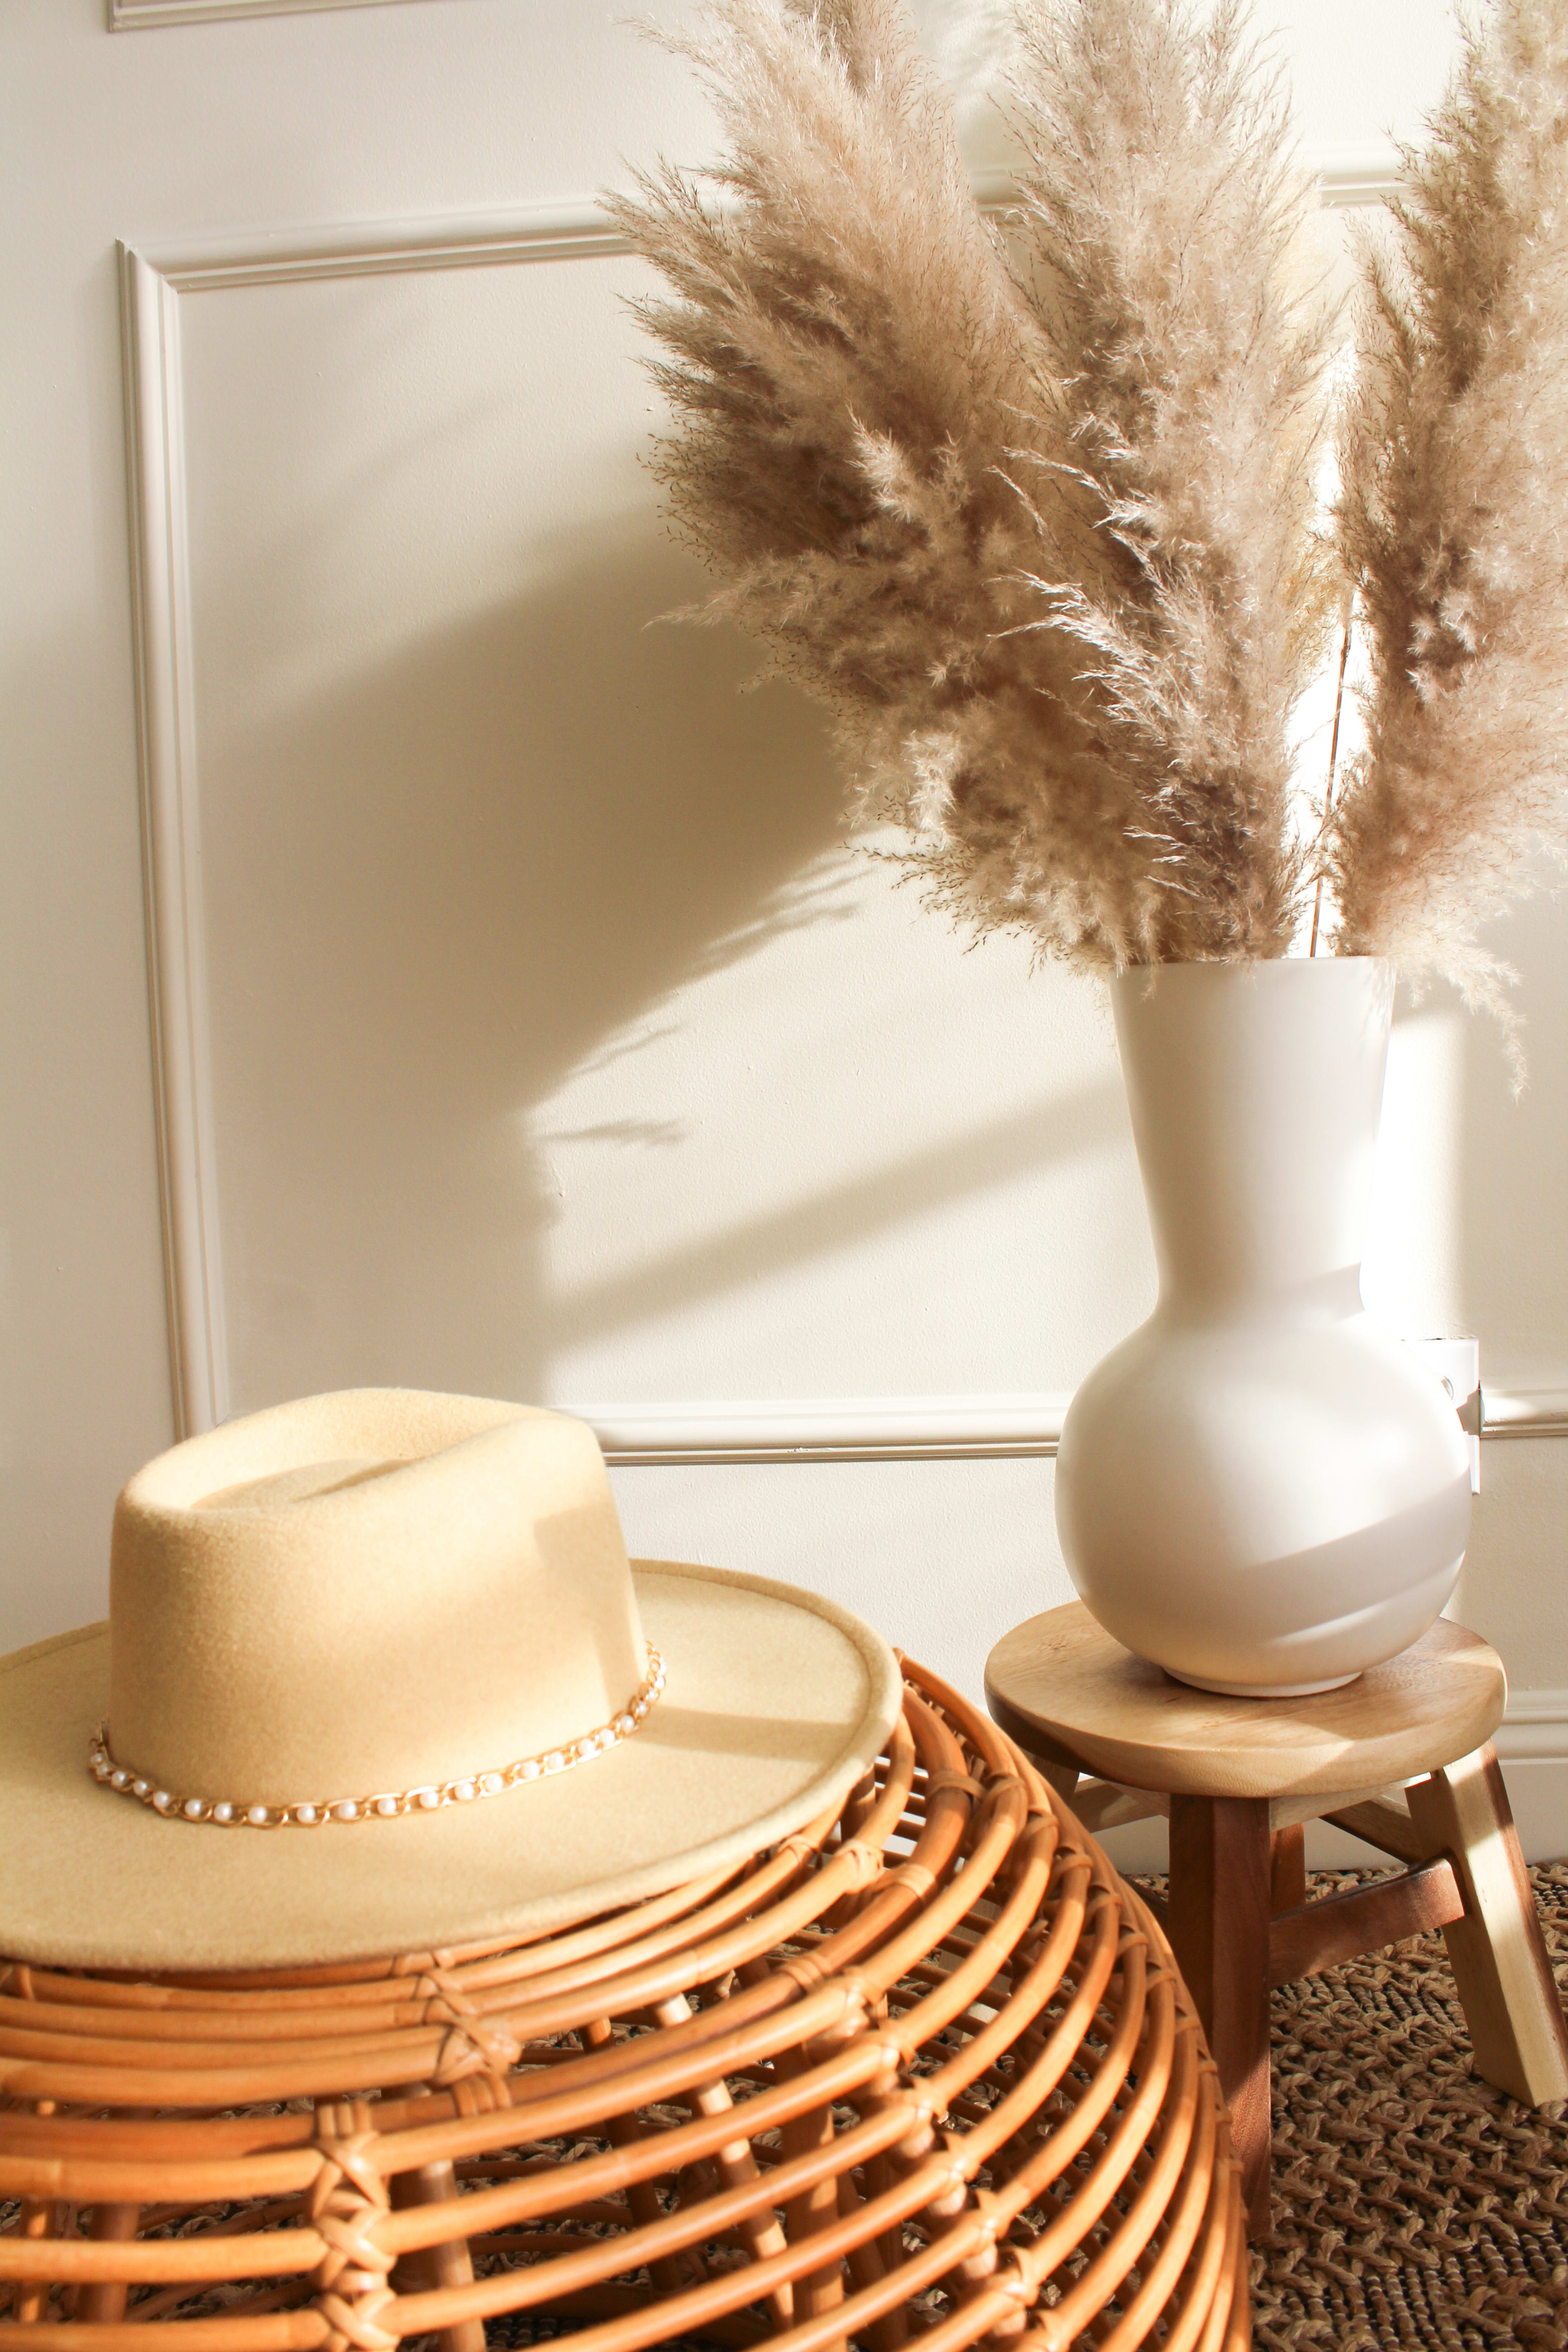 A boho photoshoot with a hat and vase on a beige table.